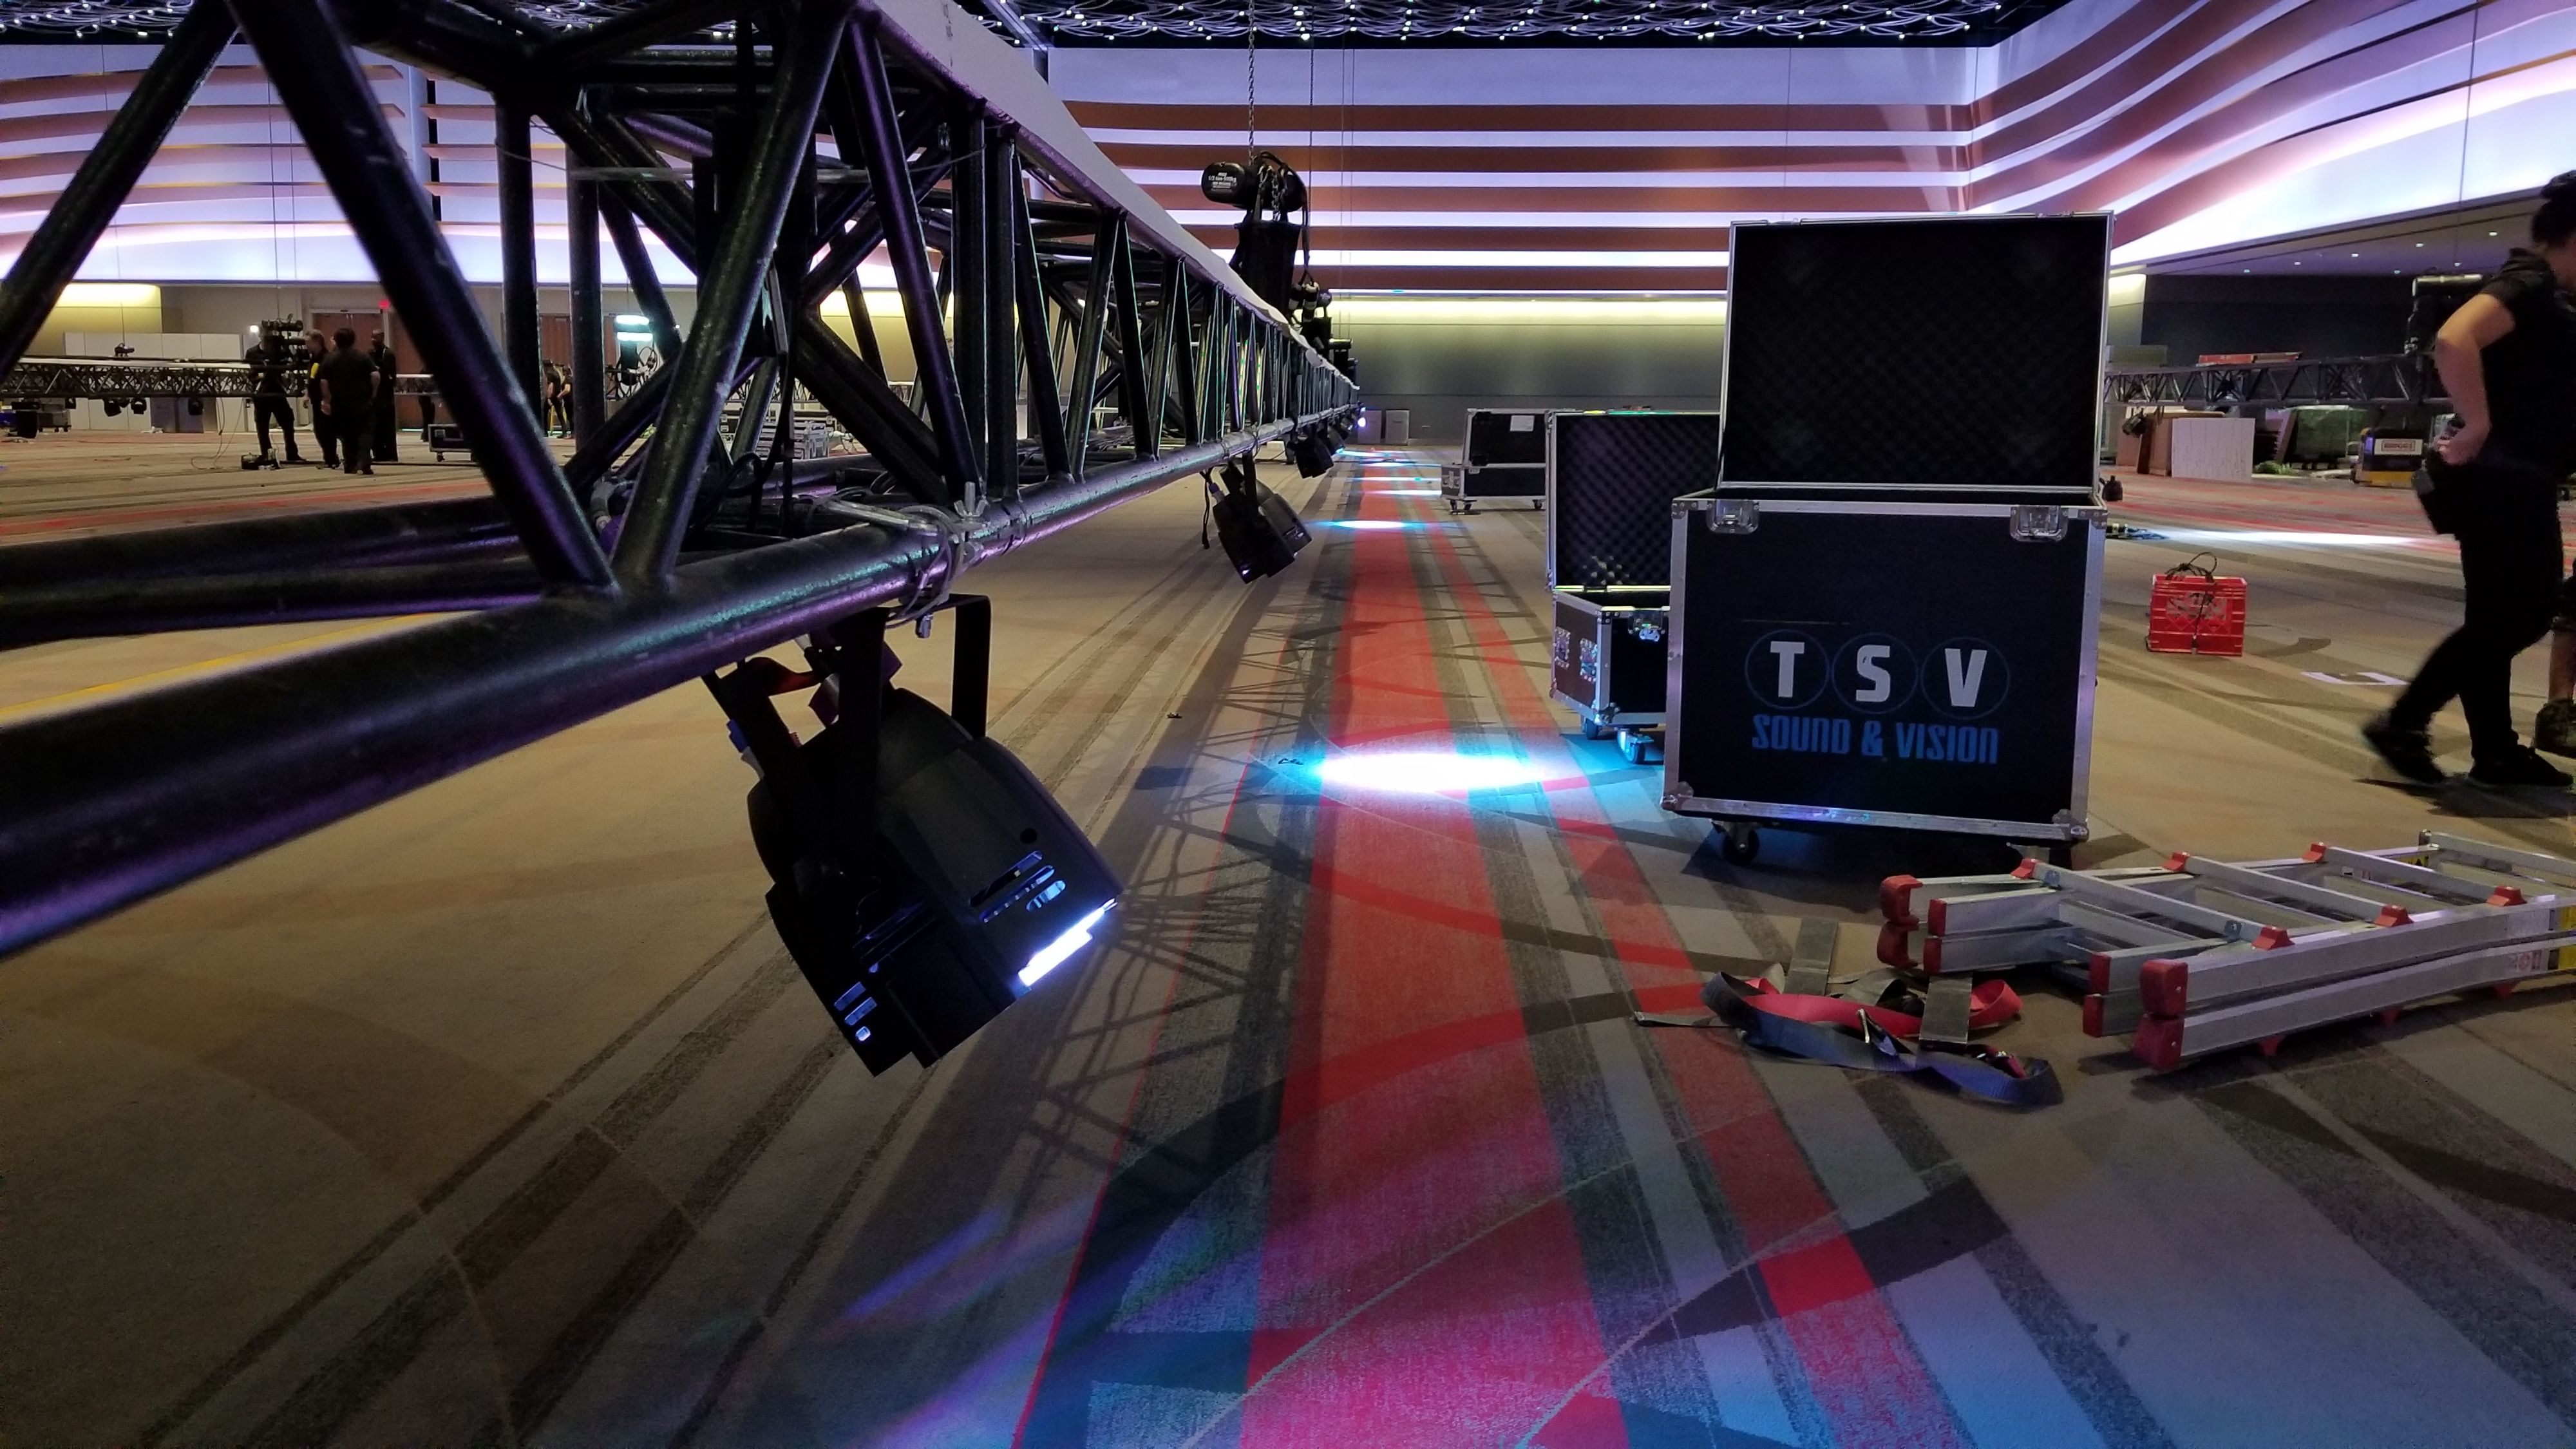 LED Light rigged on a truss at a conference